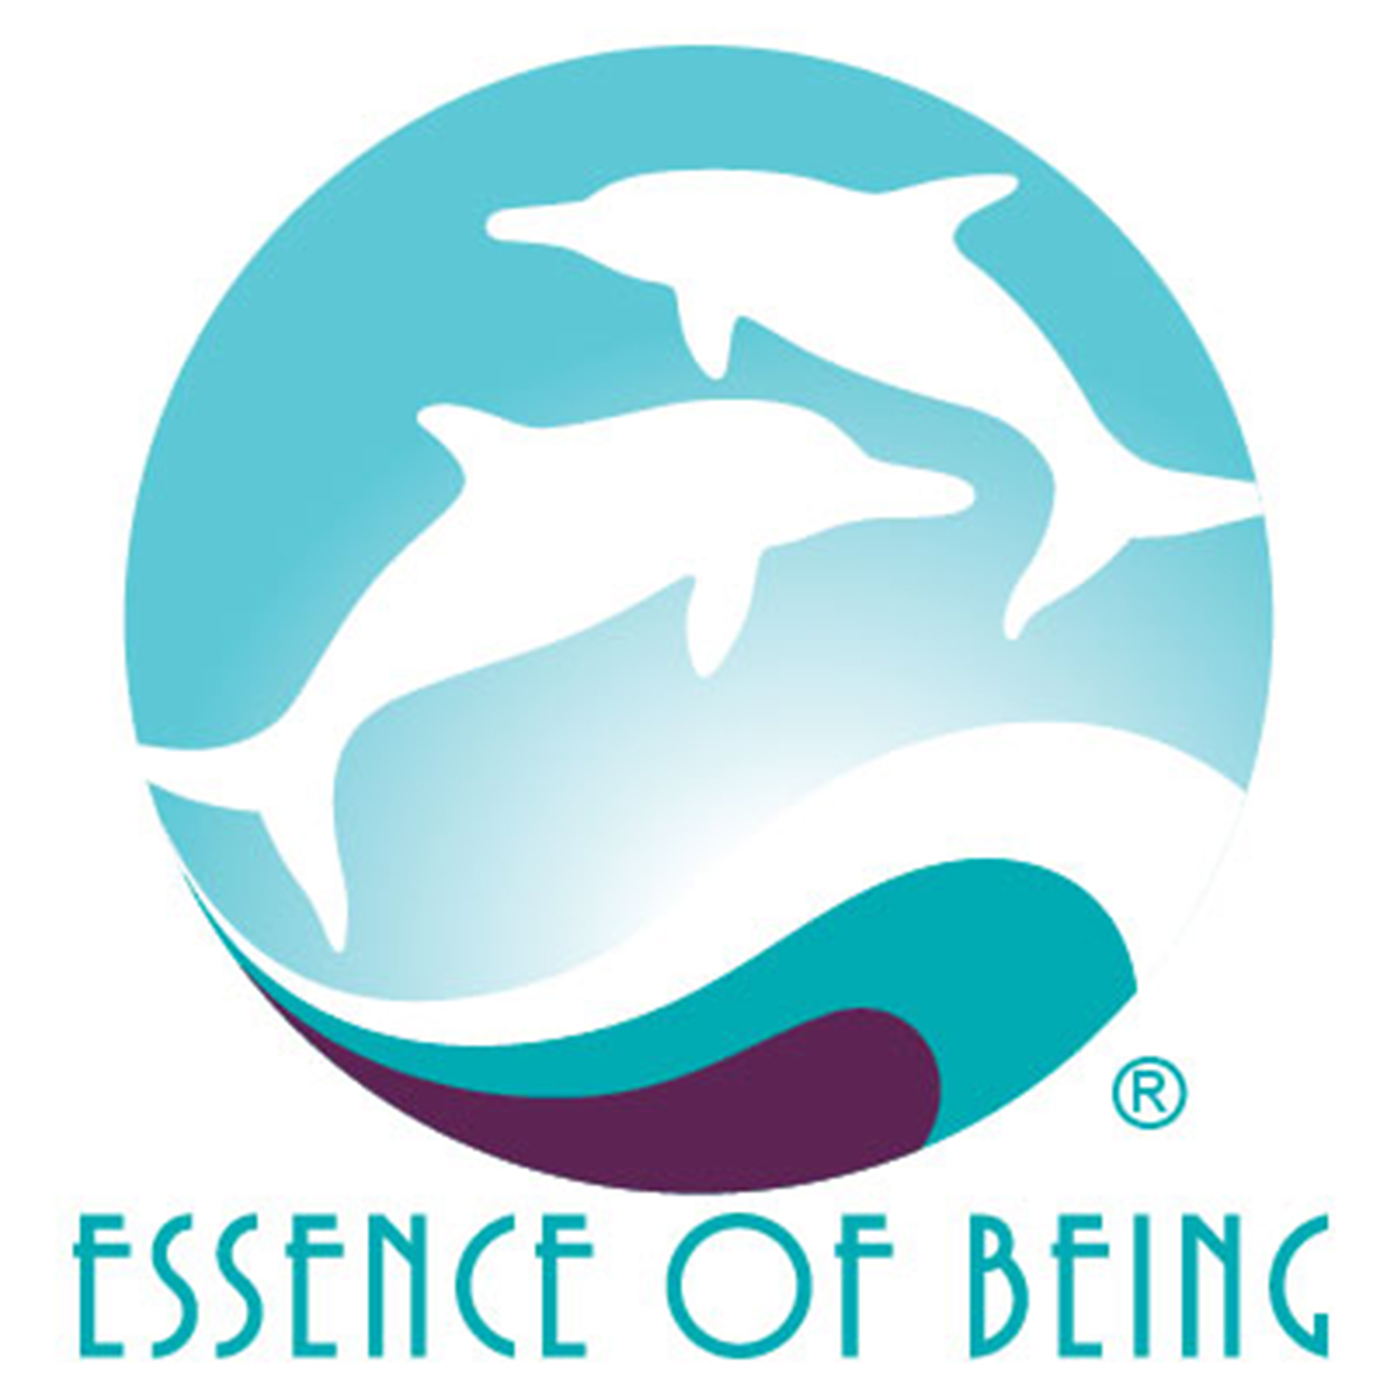 Essence of Being